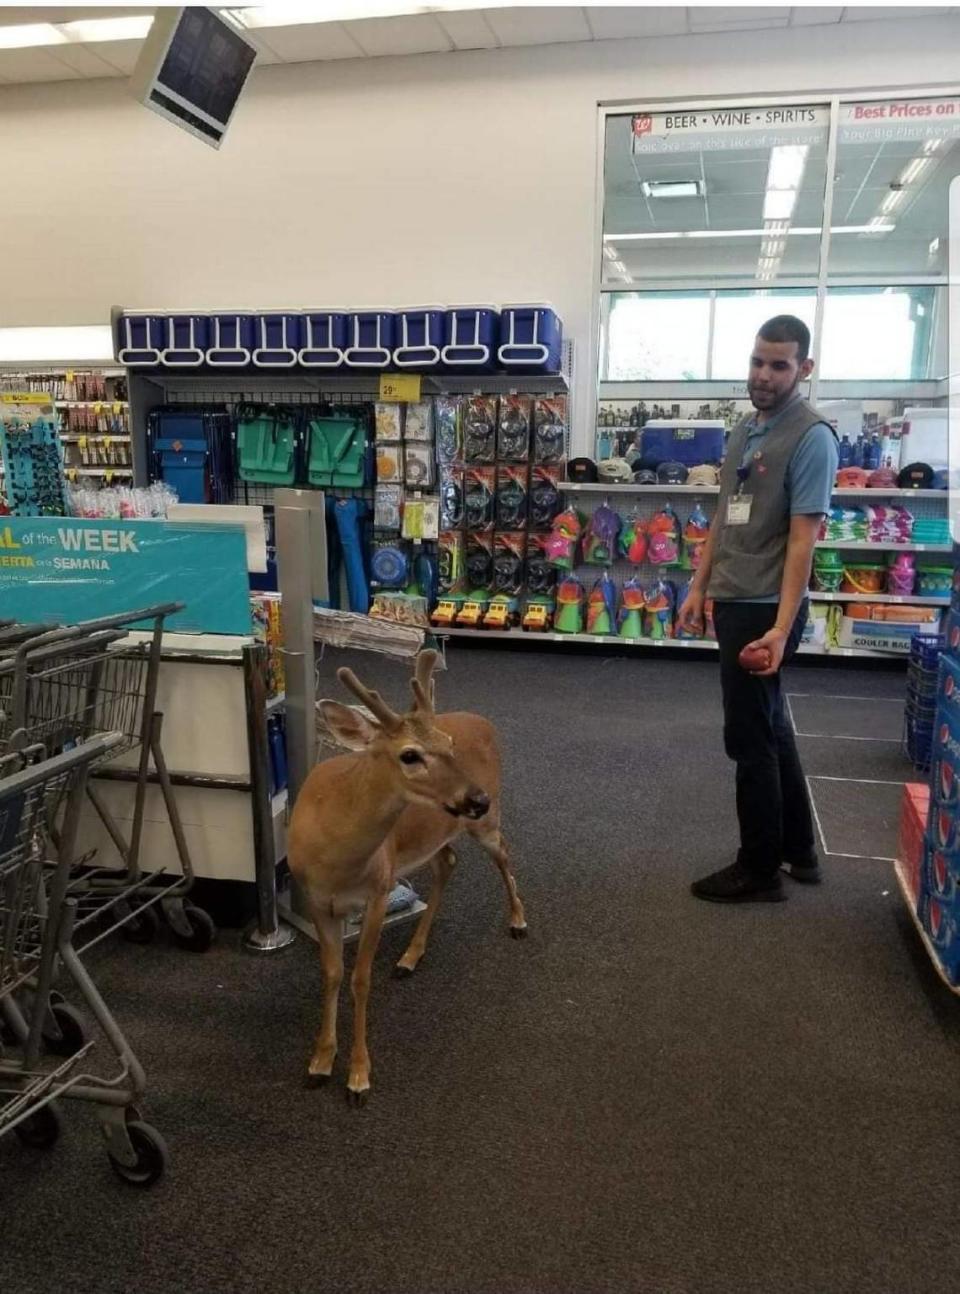 A Key deer recently entered a Walgreens on Big Pine Key. The deer have become tamed and accustomed to approaching people, which experts say can get them killed on the highway.